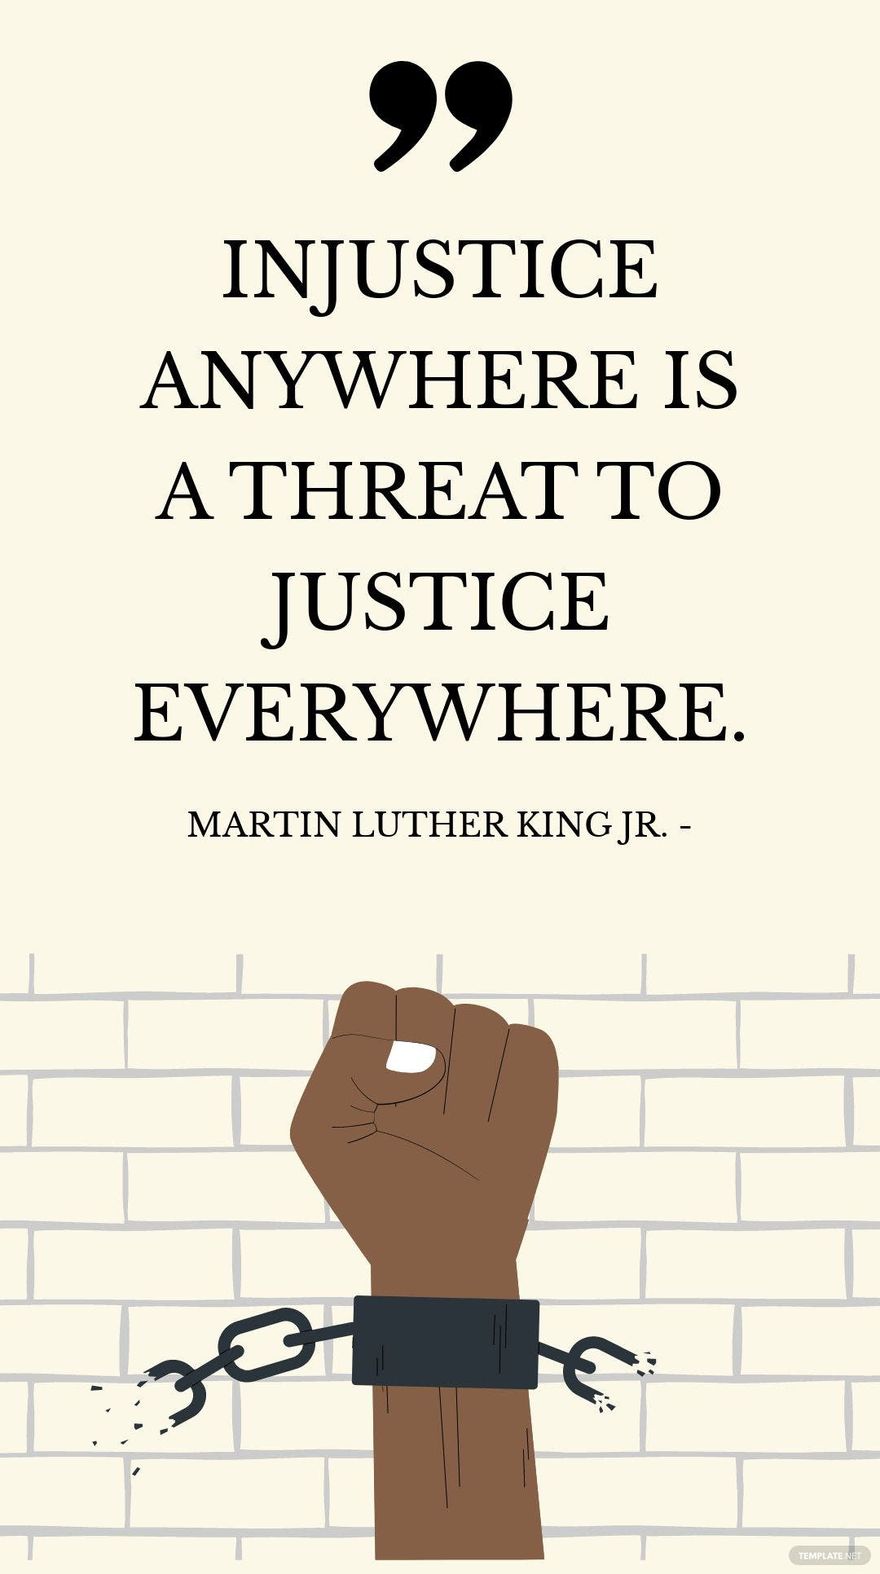 Free Martin Luther King Jr. - Injustice anywhere is a threat to justice everywhere. in JPG